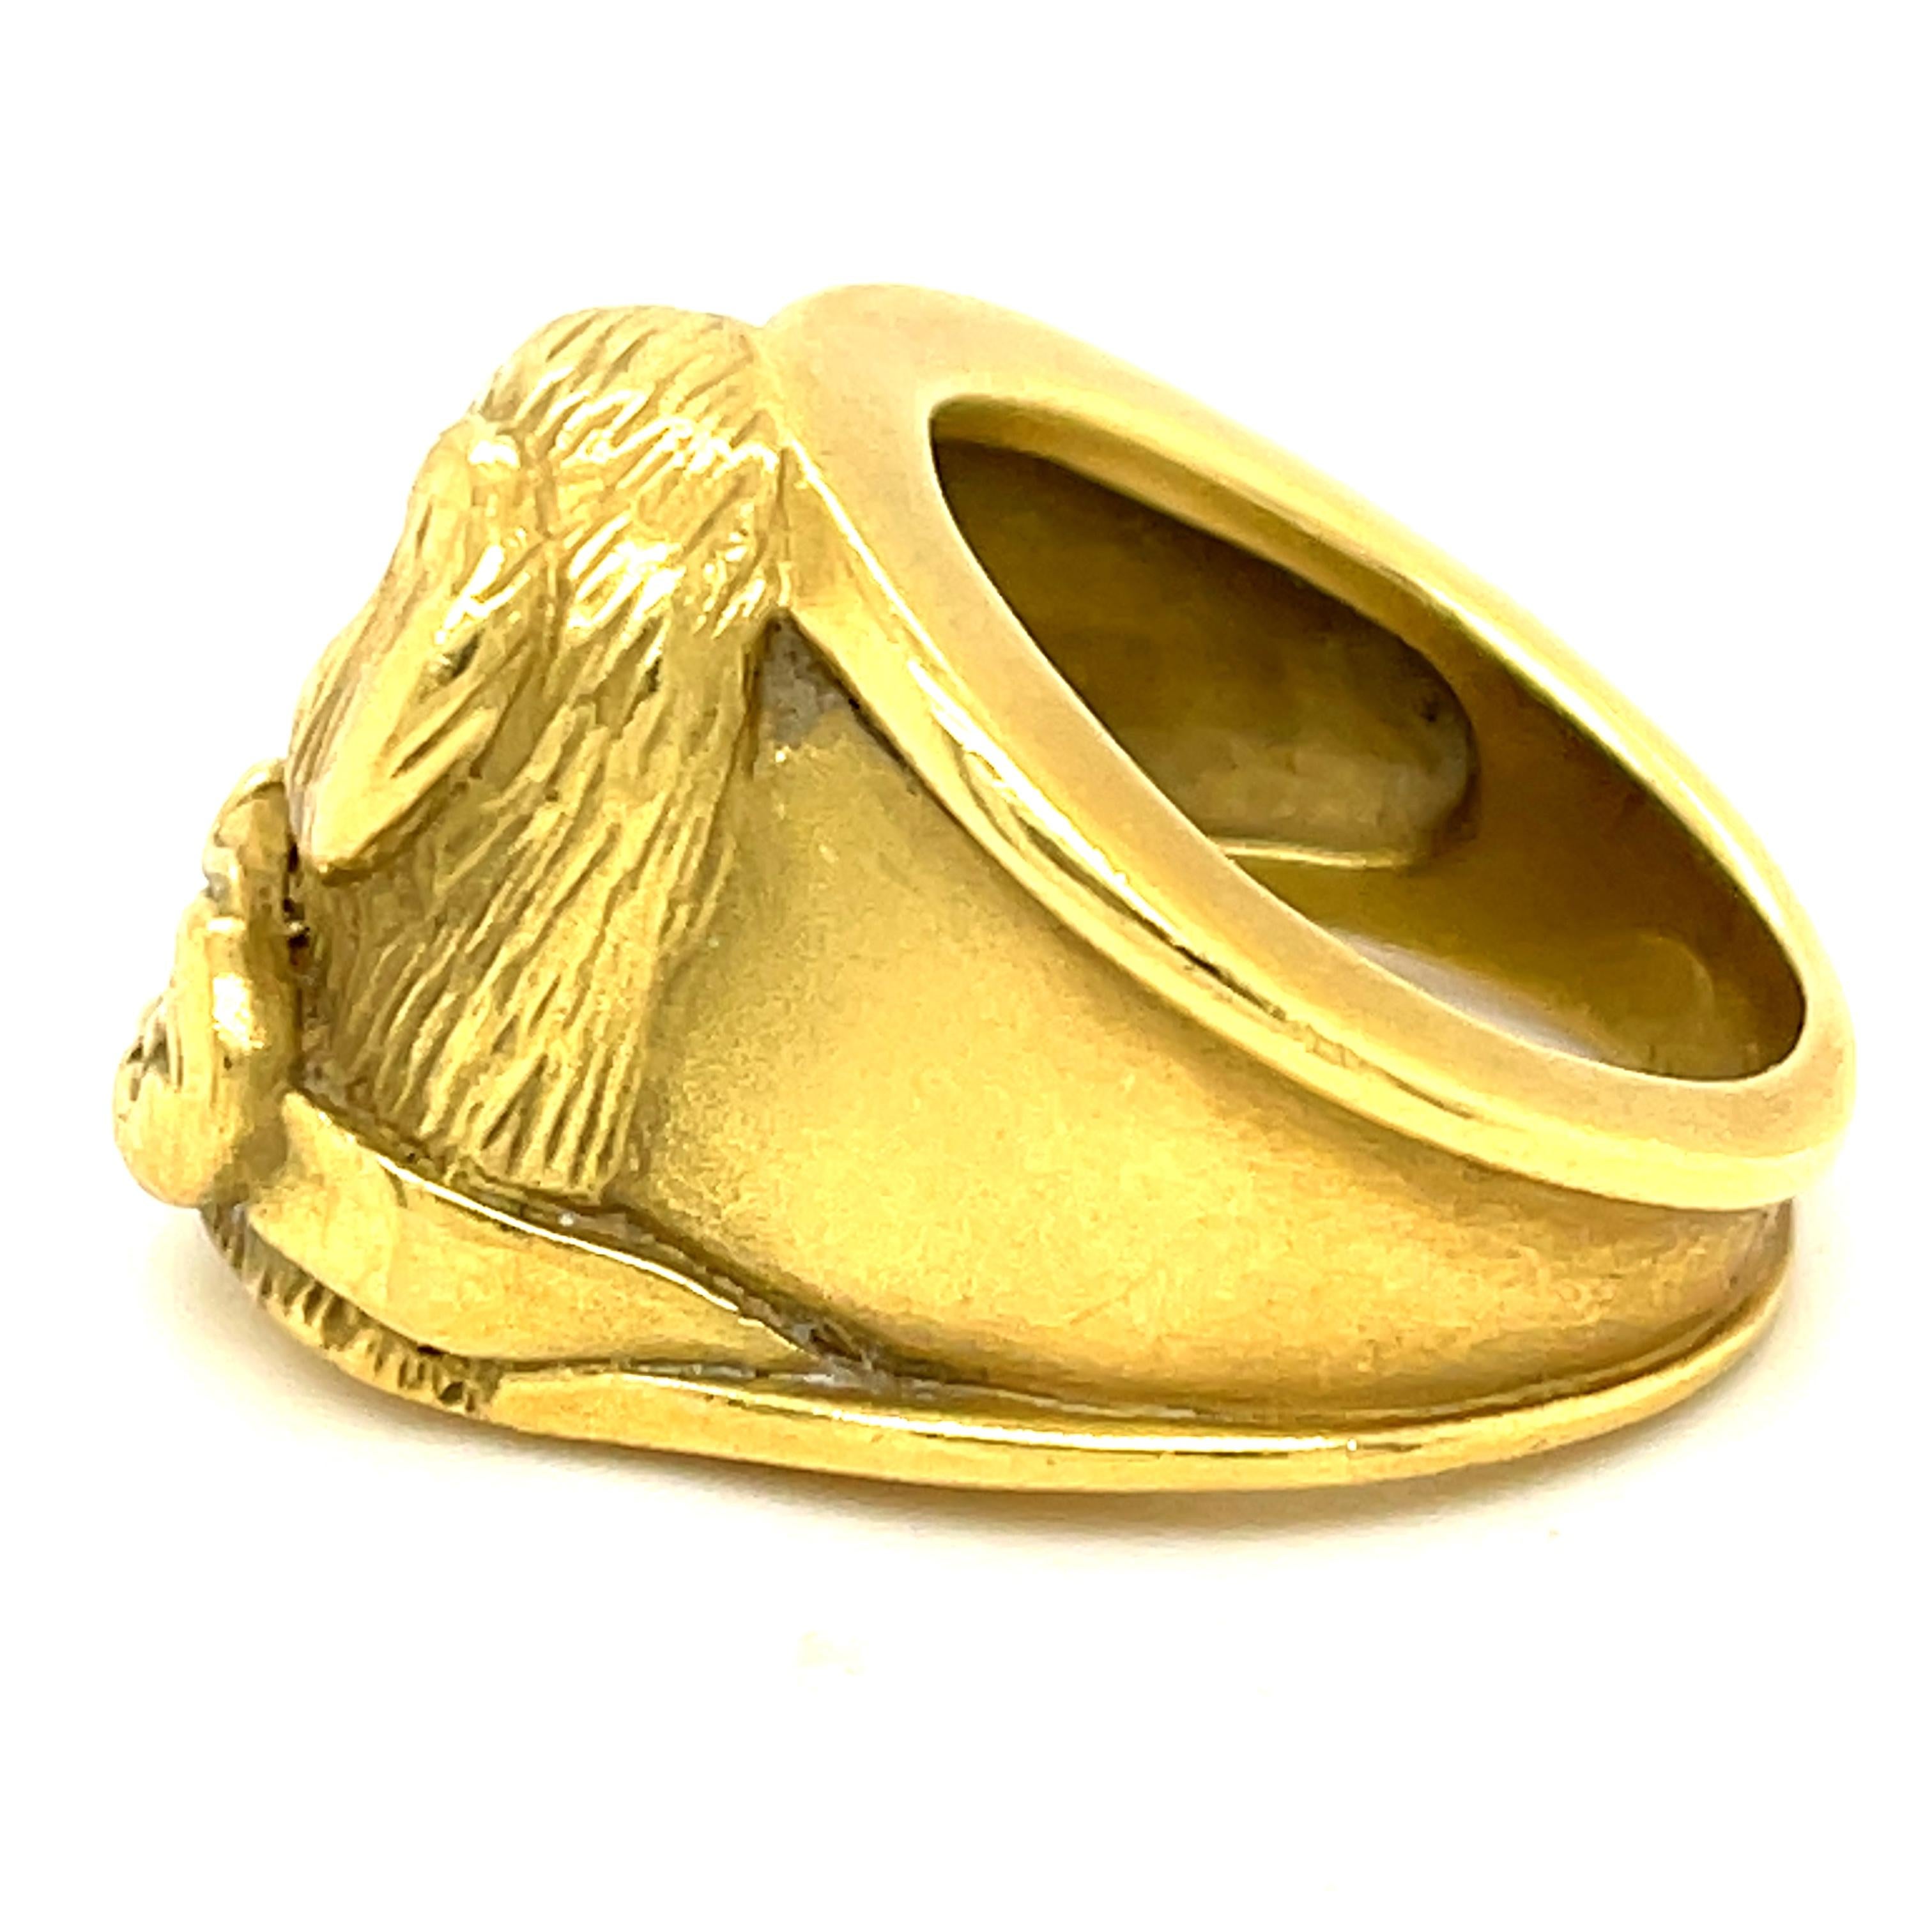 A whimsical sculptured ring of a hound by Kieselstein-Cord, circa 1990. The dog is a spaniel or perhaps a Labrador. It is a fun ring for the dog lover. Classic Keiselstein style who was known for well manufactured heavy gold jewelry often in animal